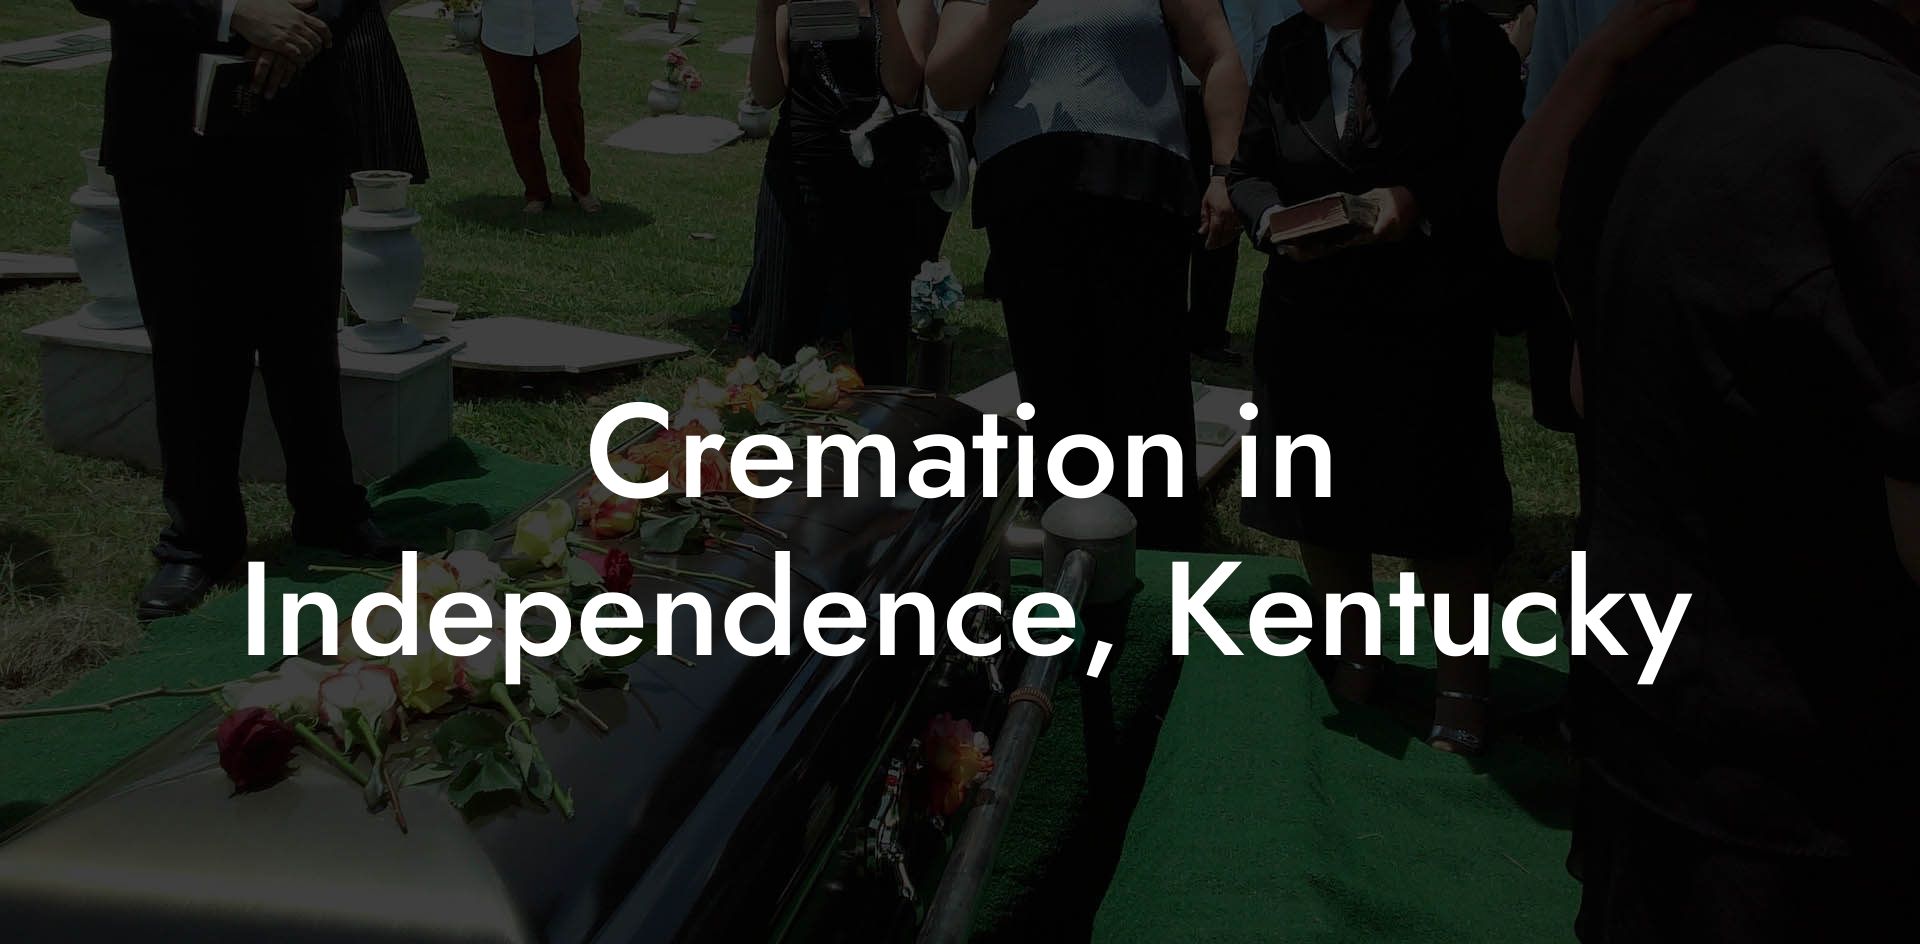 Cremation in Independence, Kentucky